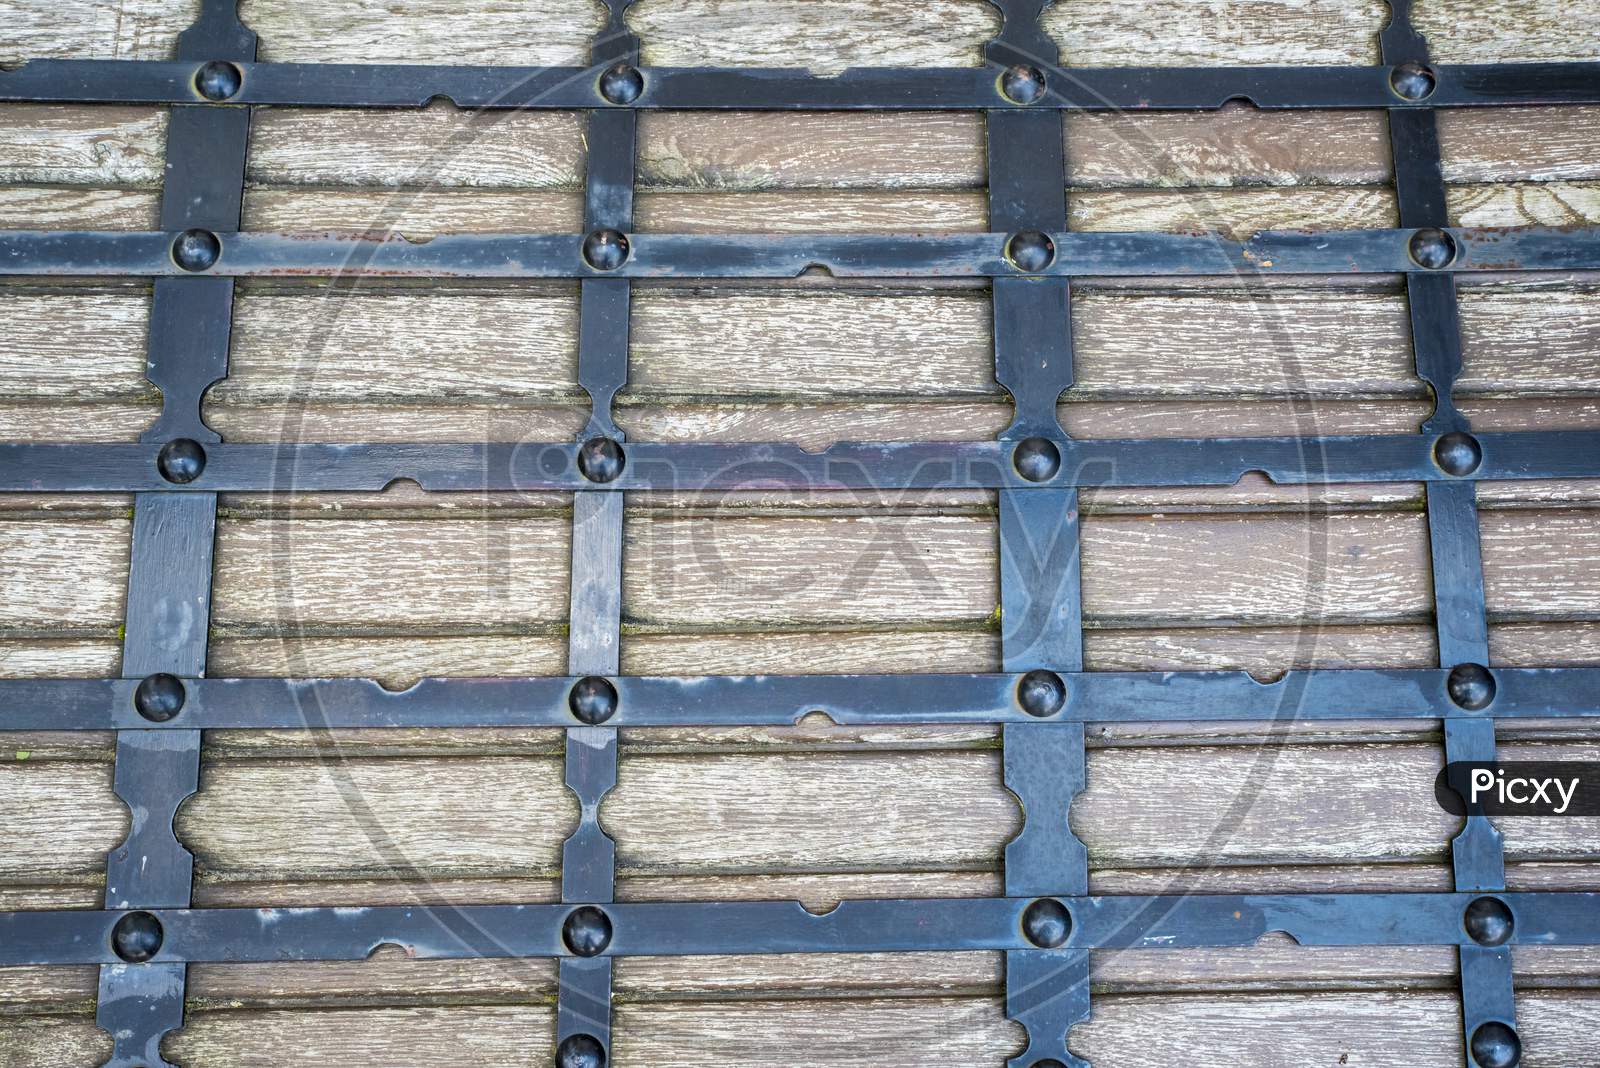 Old Wooden Gate Texture